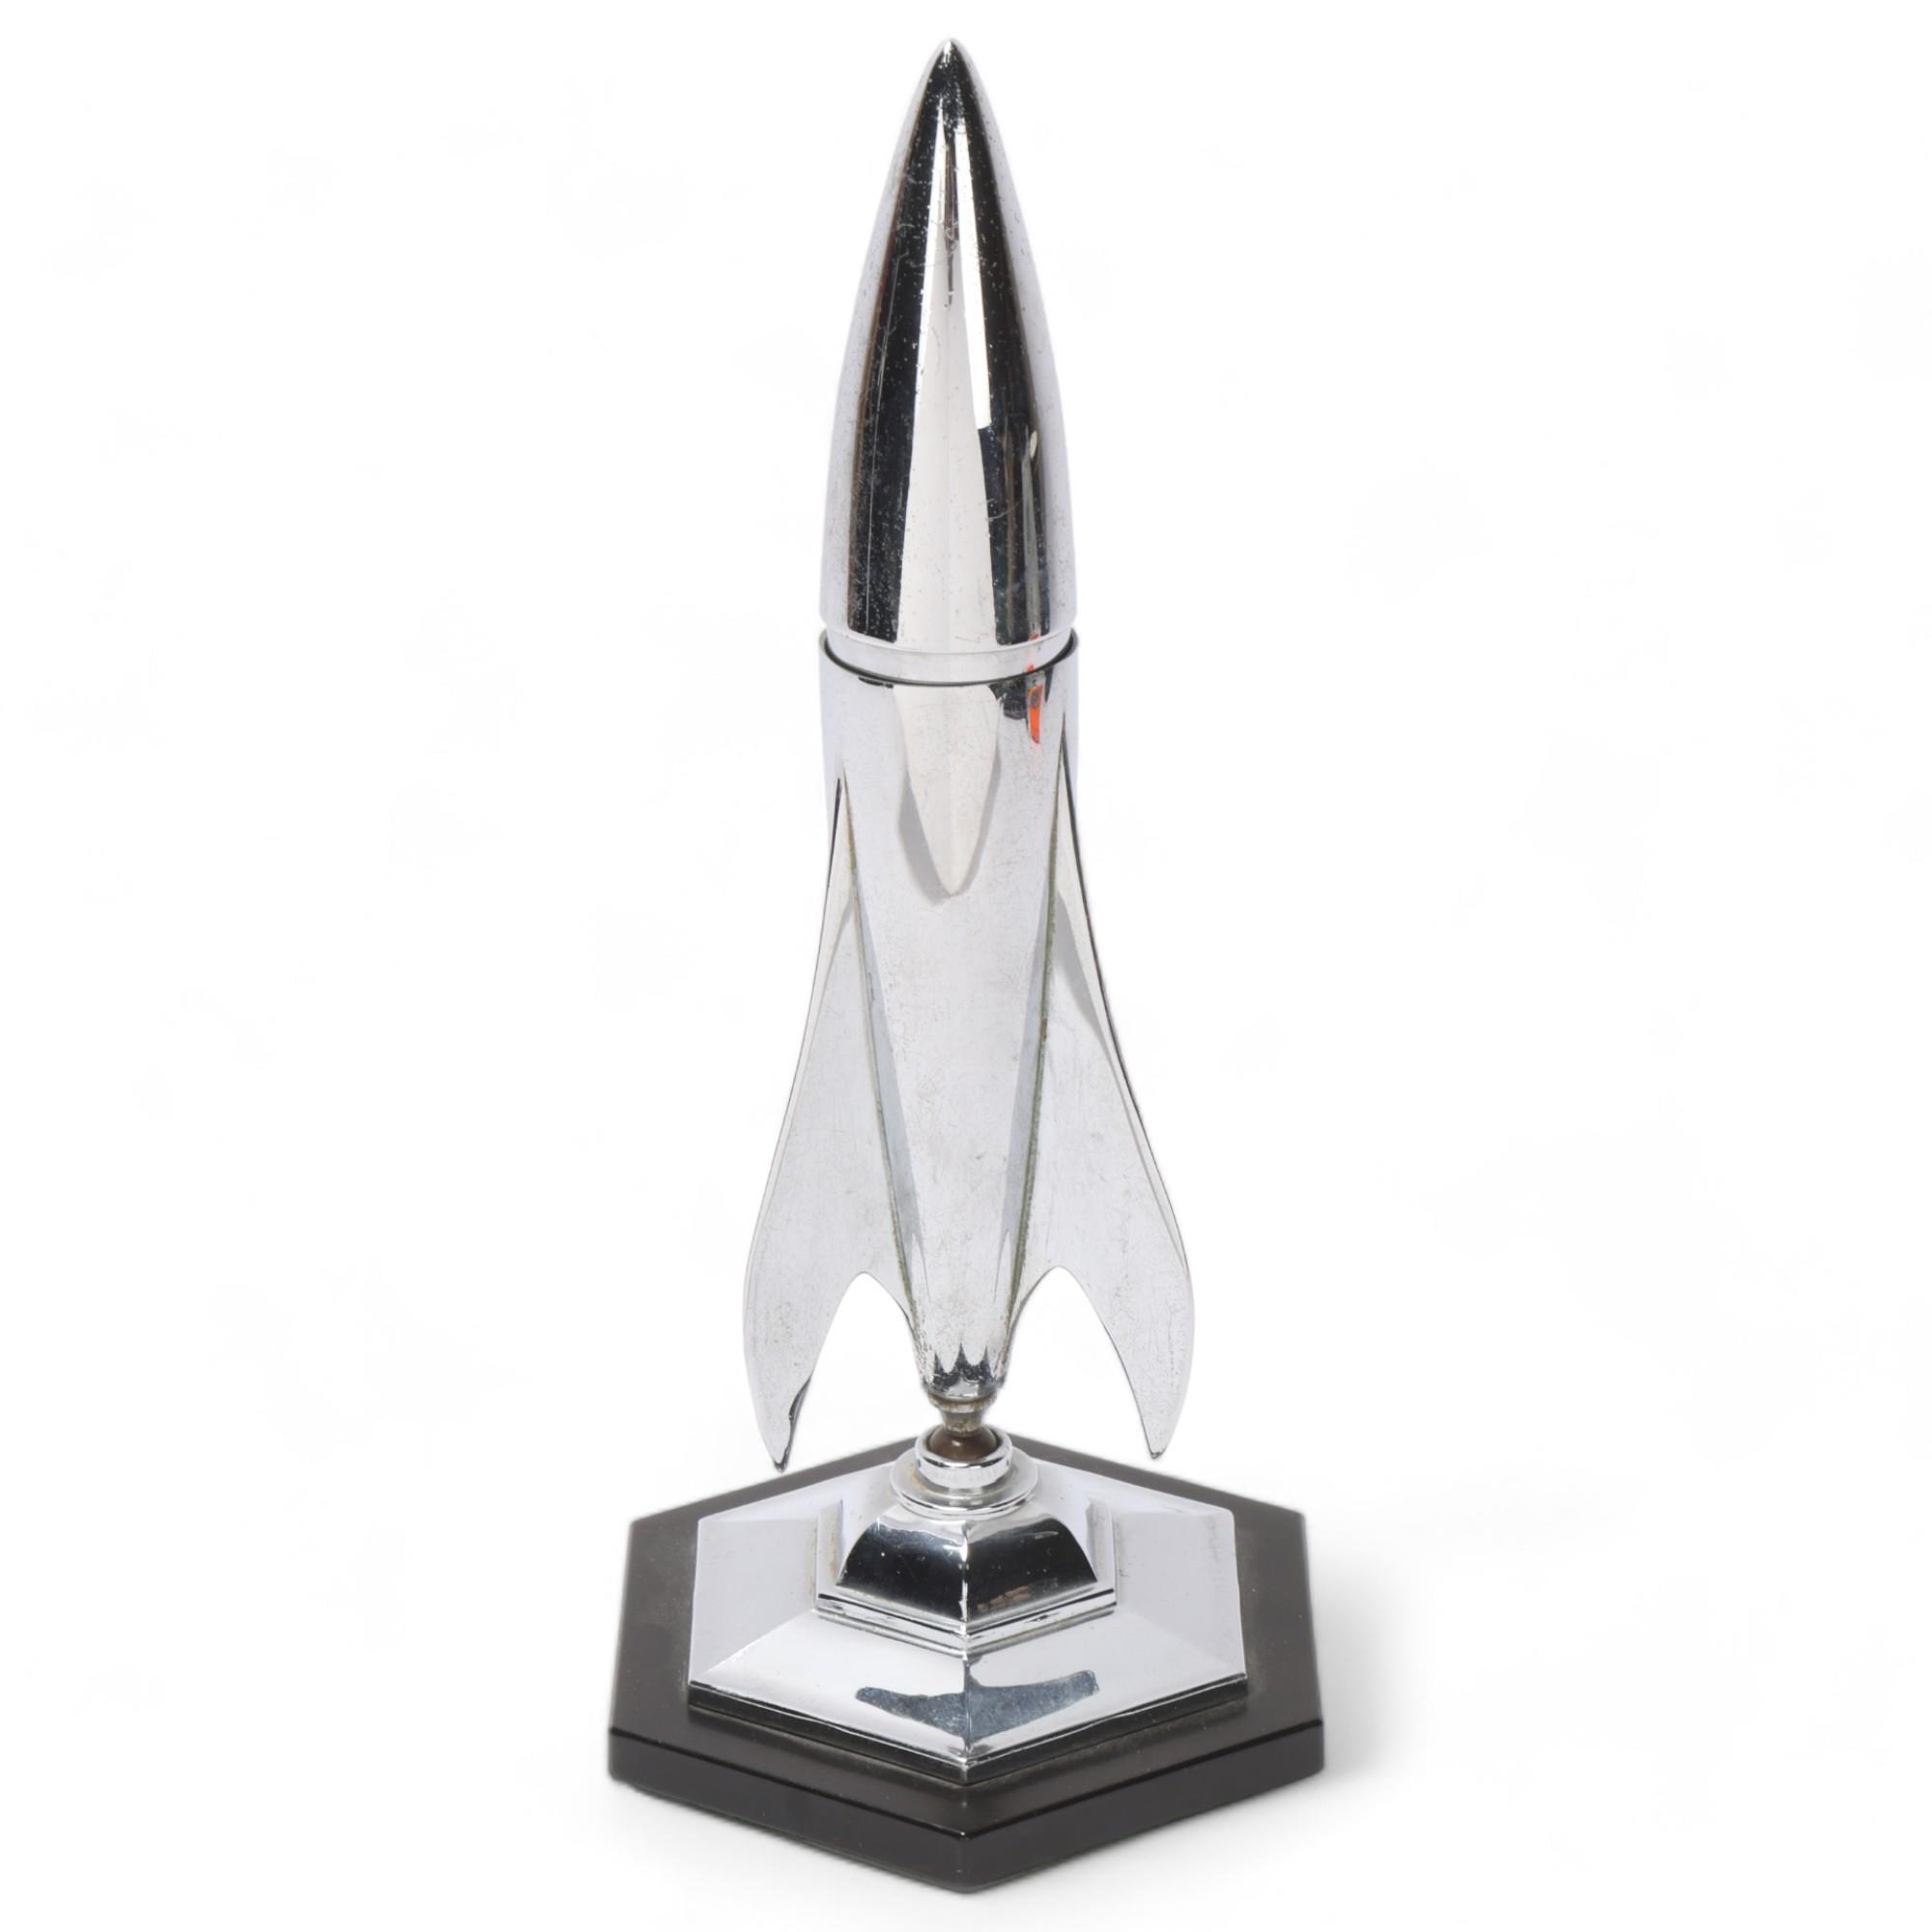 Art Deco chrome rocket table lighter, mounted on a ball joint, with removeable tip, no maker's